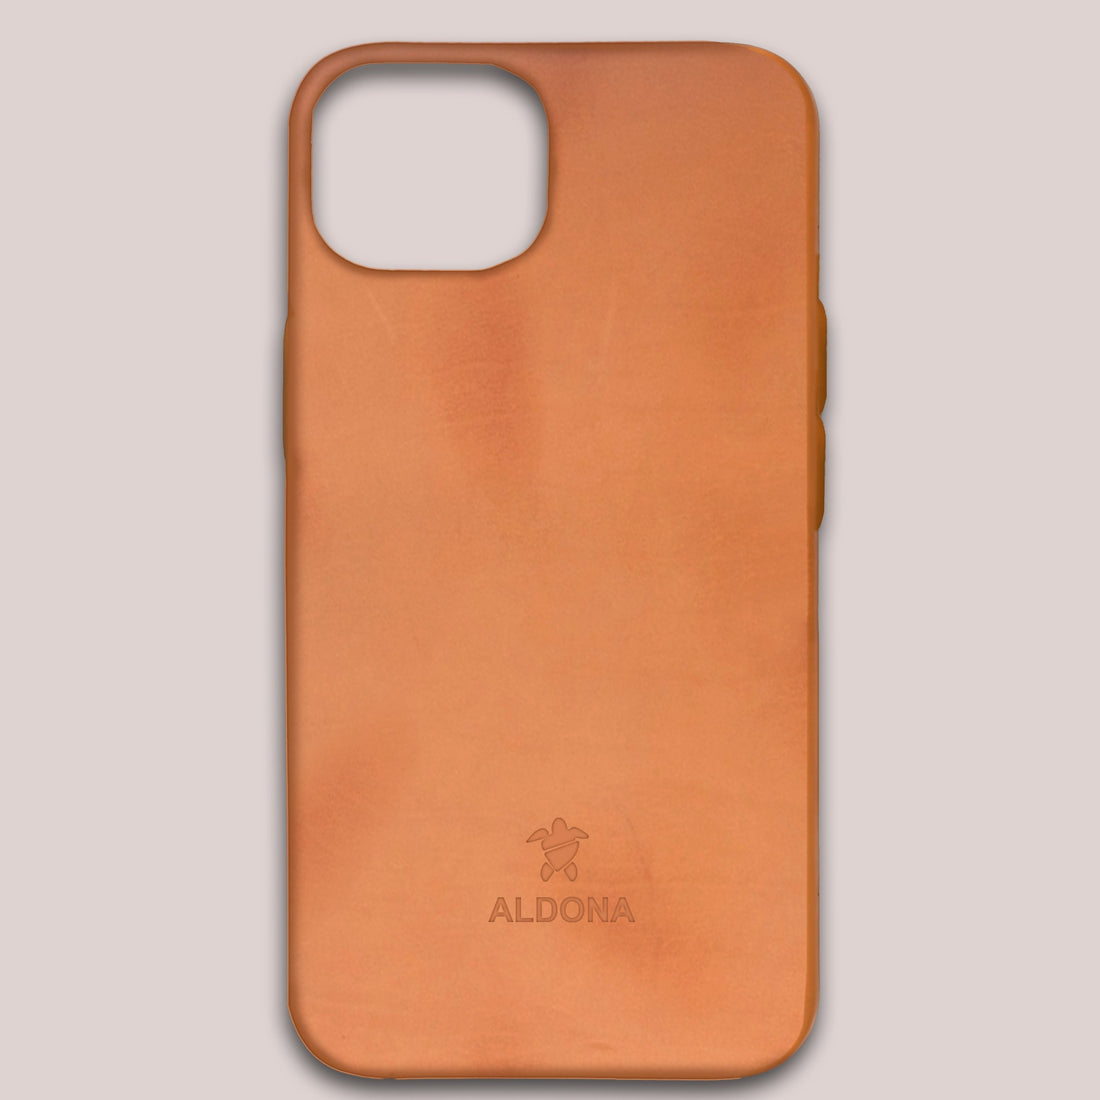 Kalon Case for iPhone 13 series with MagSafe Compatibility - Vintage Tan